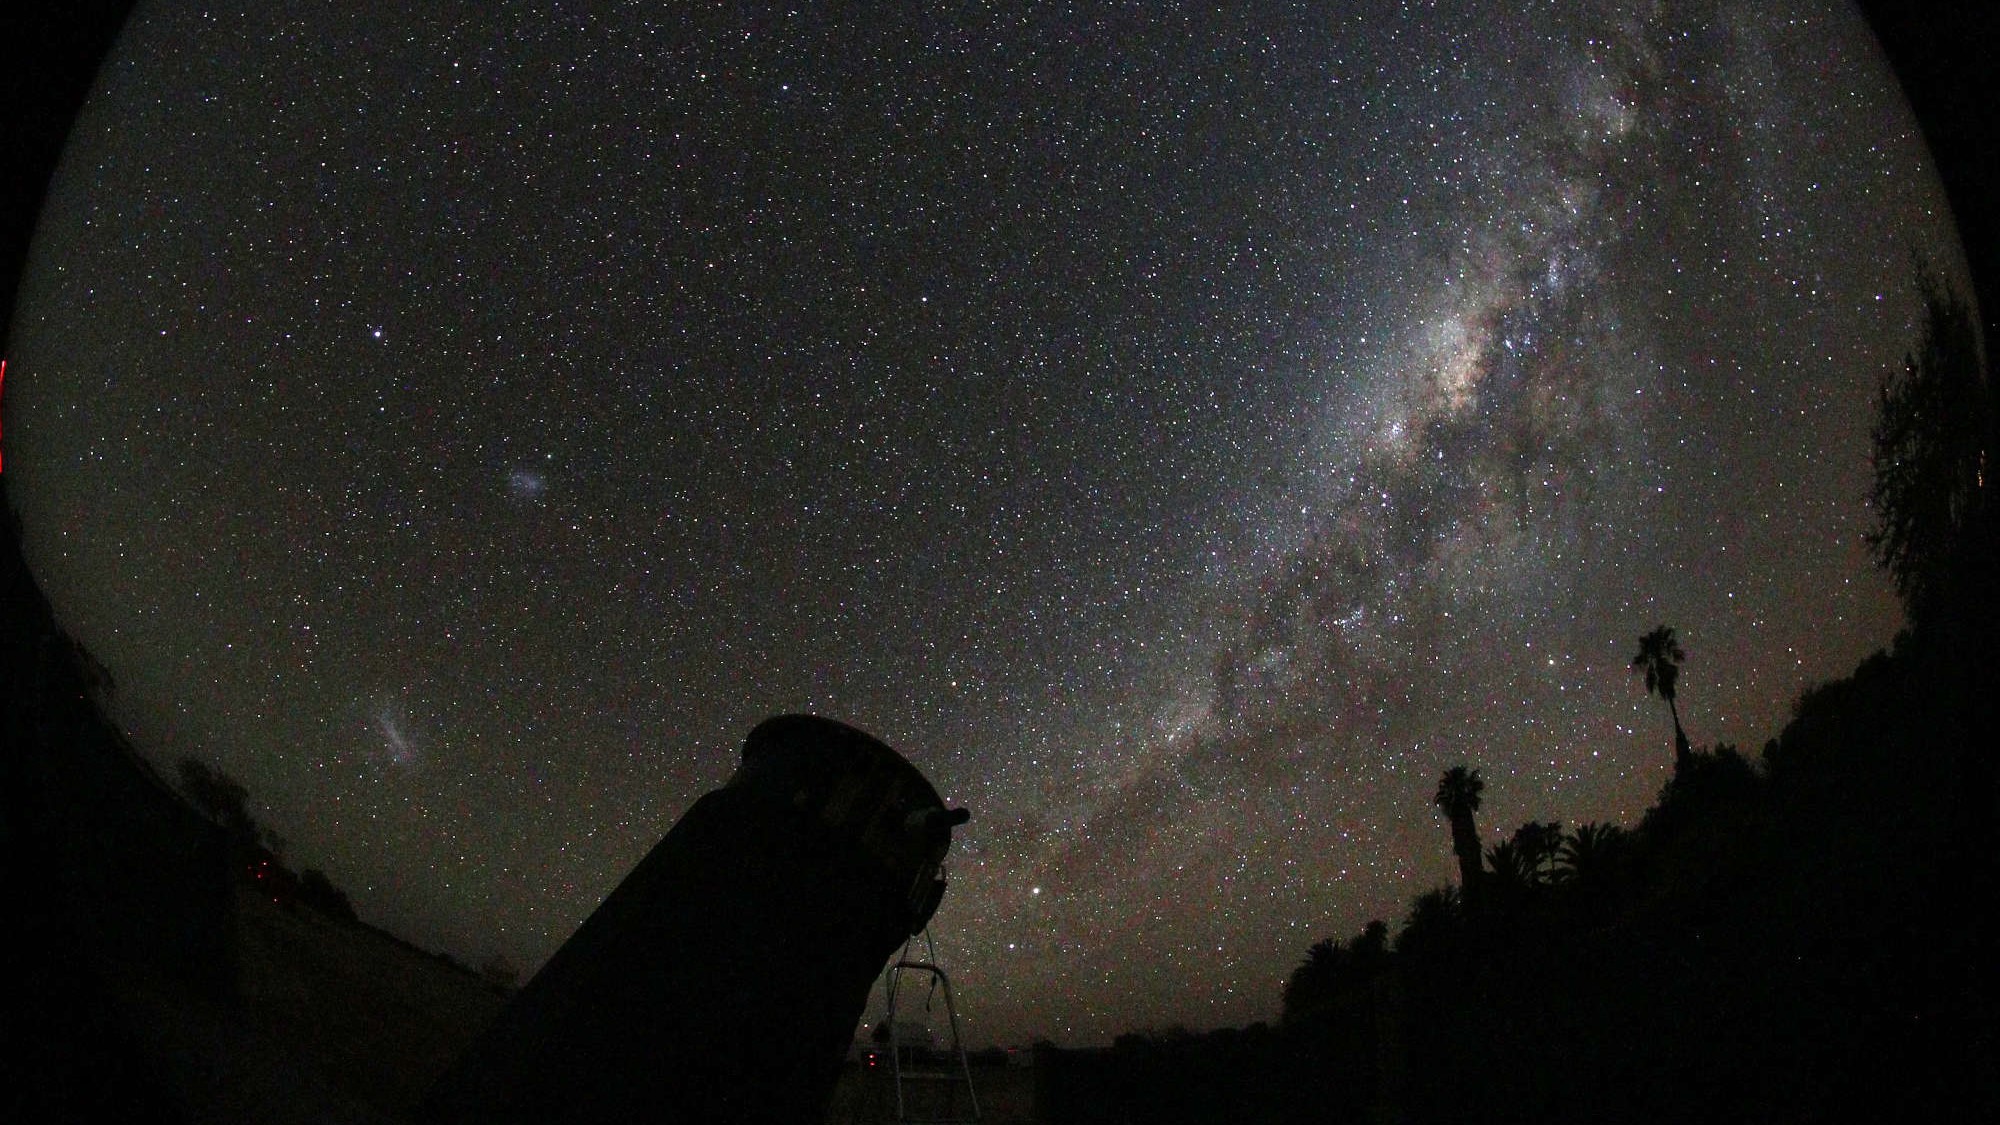 Light pollution damaging views of space for majority of large observatories, survey finds